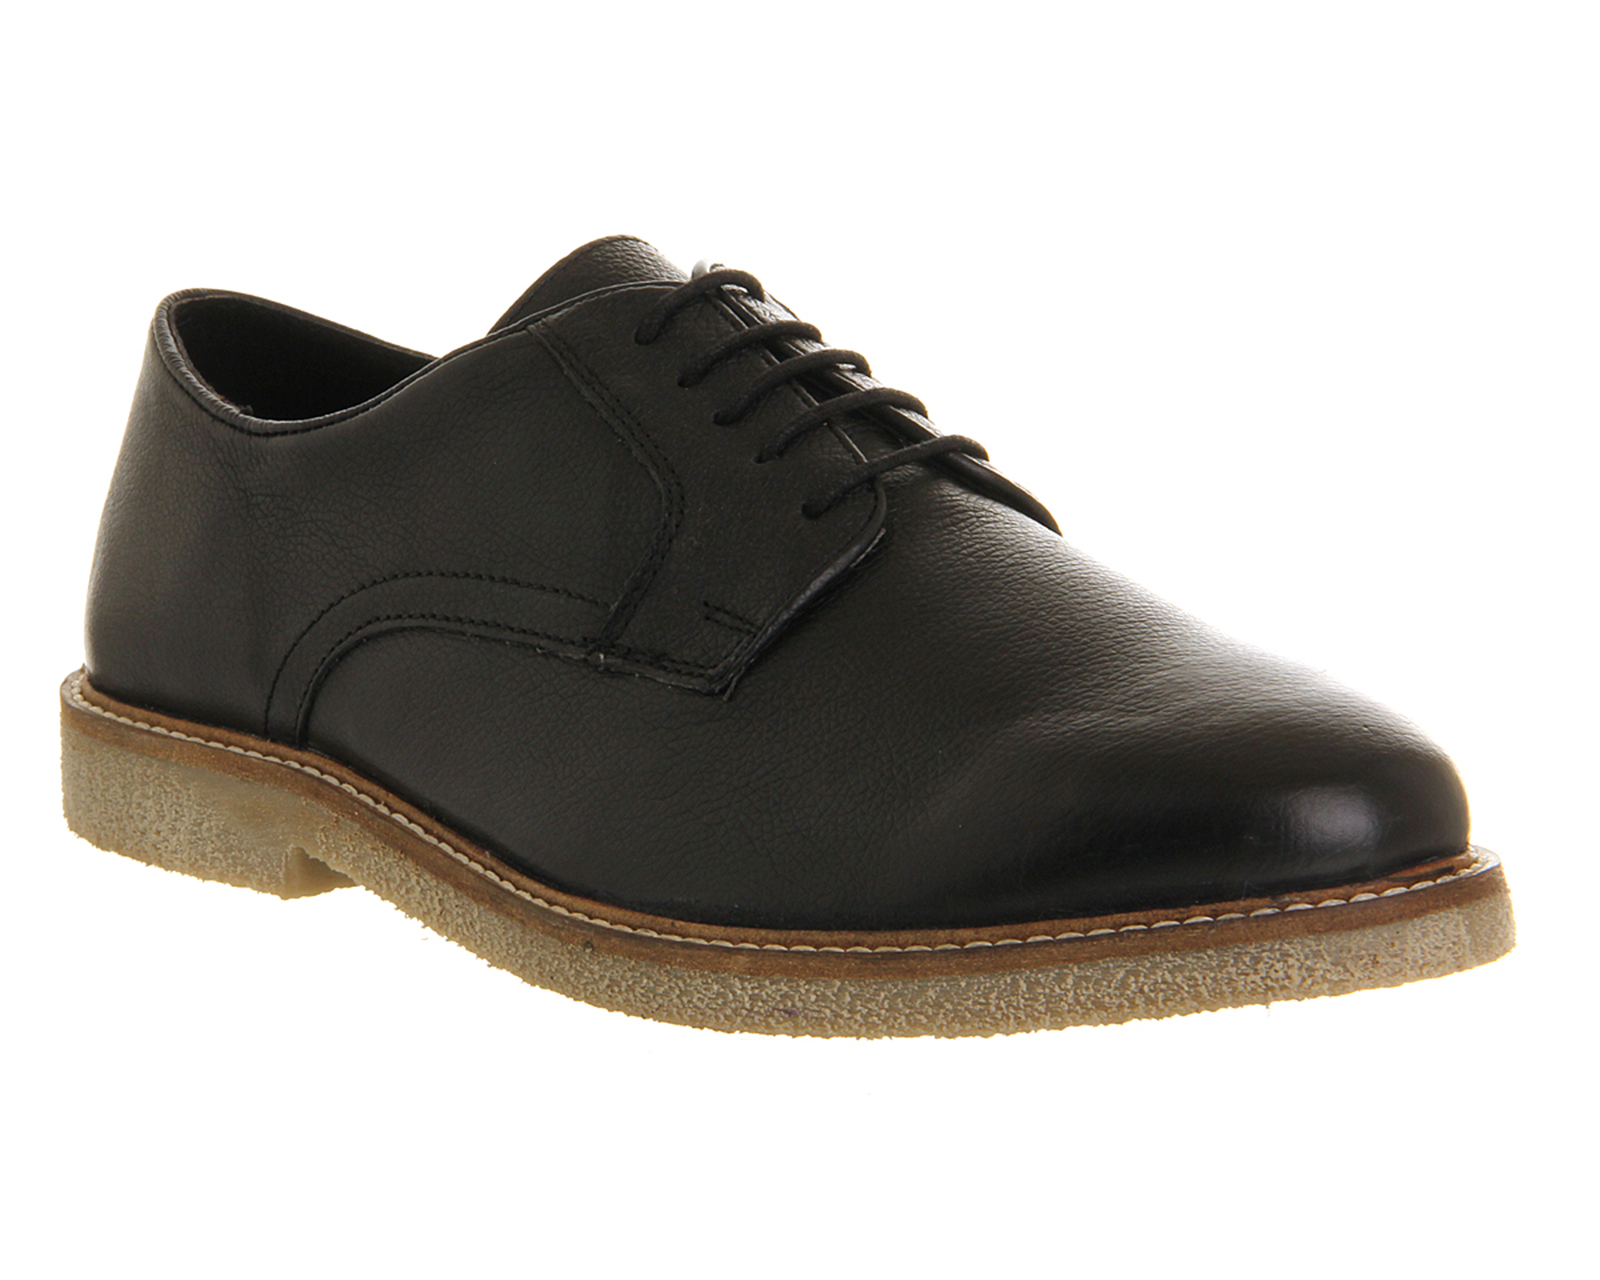 OFFICEApache Casual LaceBlack Leather